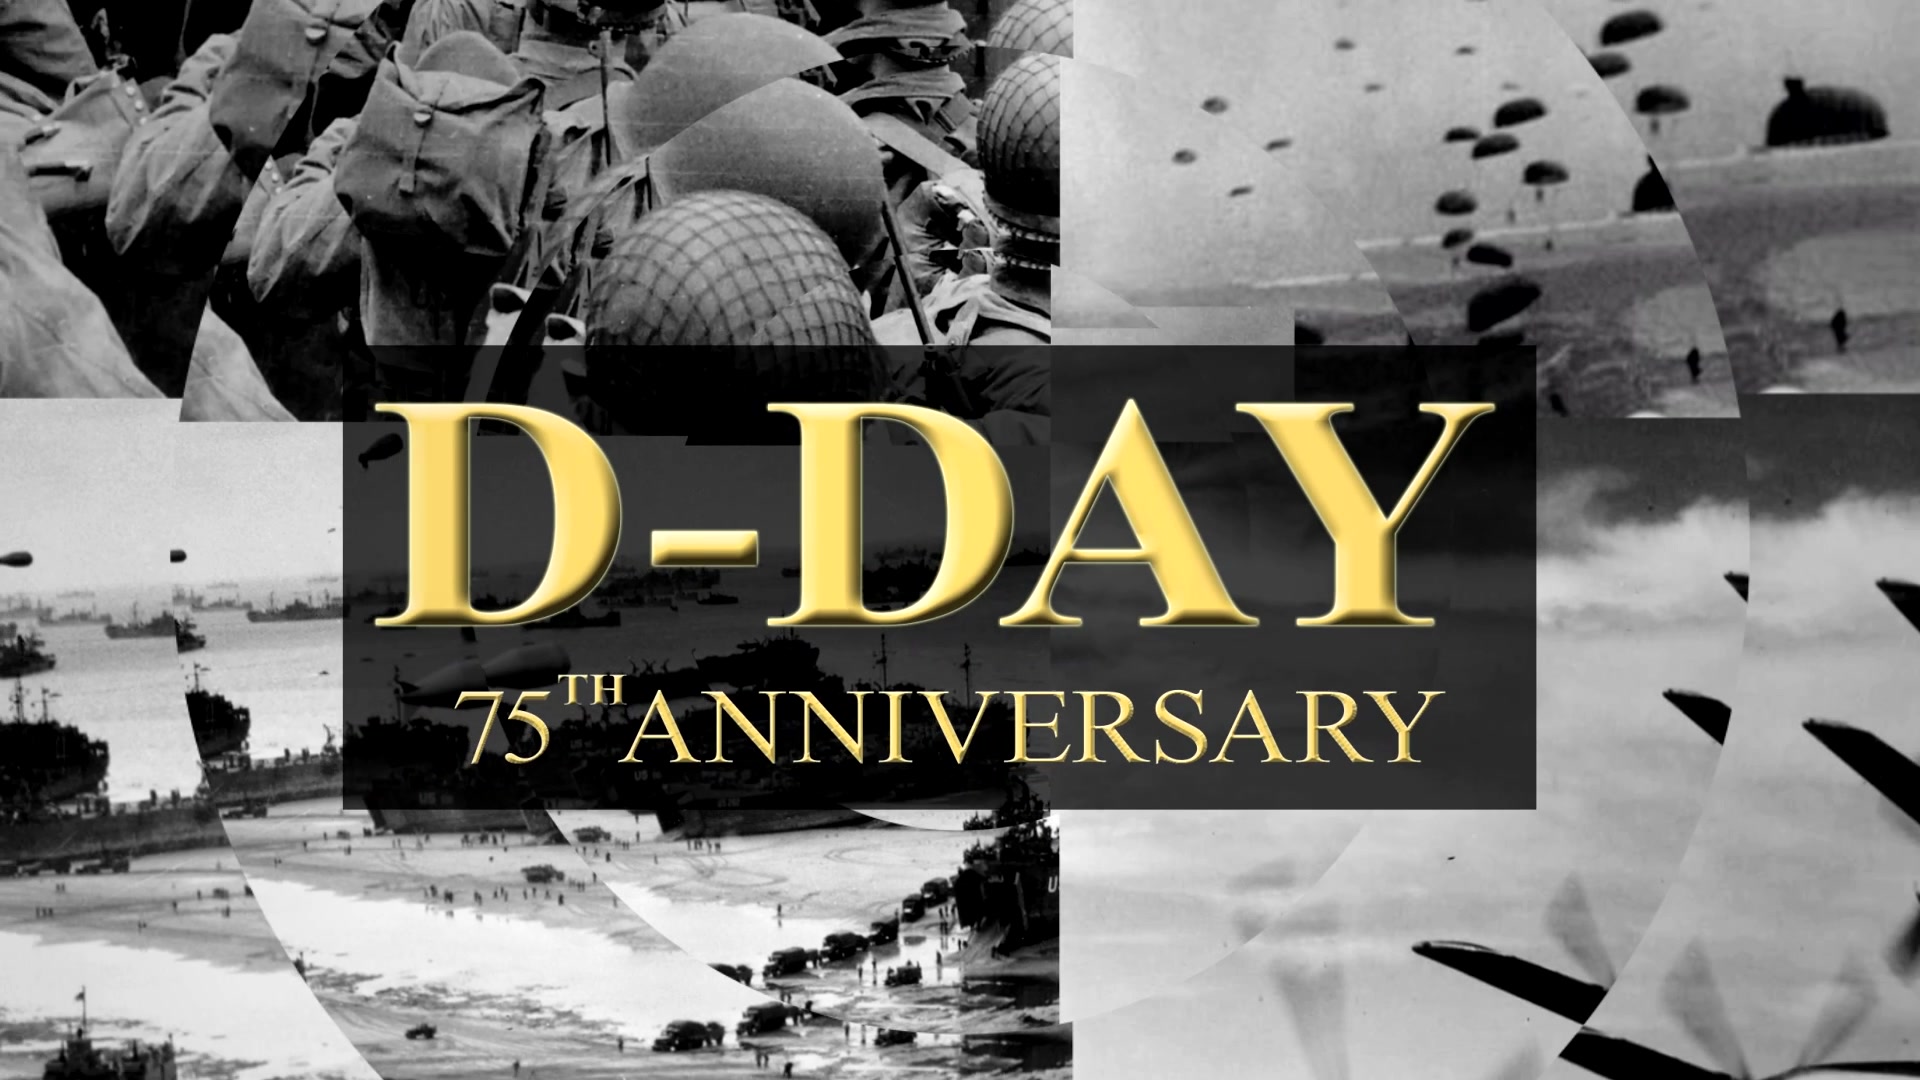 D-Day 75th Anniversary 2019: Major Events To Honour The Battle Of Normandy